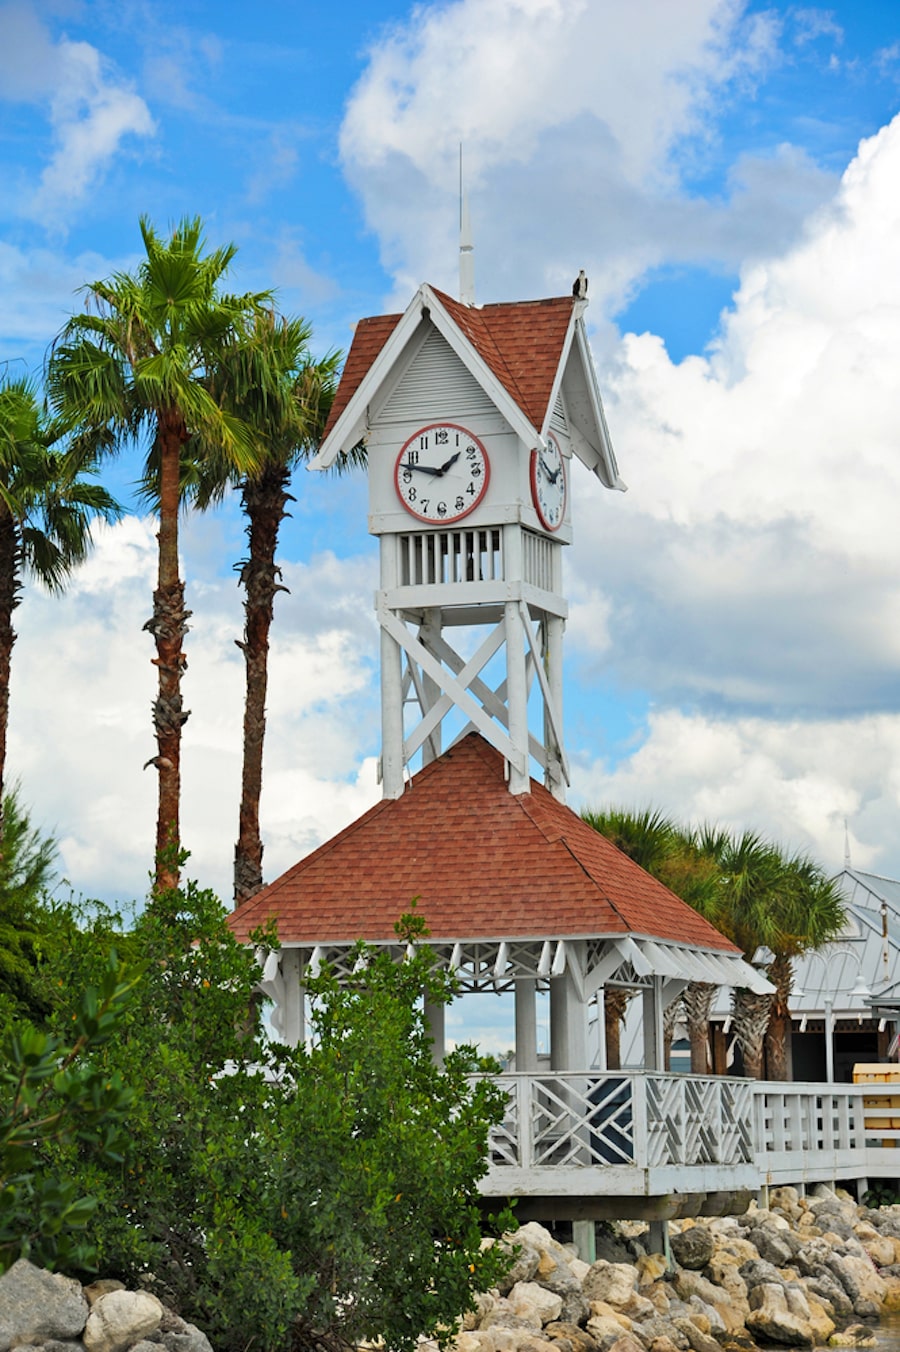 View of a historic beach pier with palm trees, a clock and blue skies, a great for spending some quality time together on your Anna Maria Island Romantic Getaway!